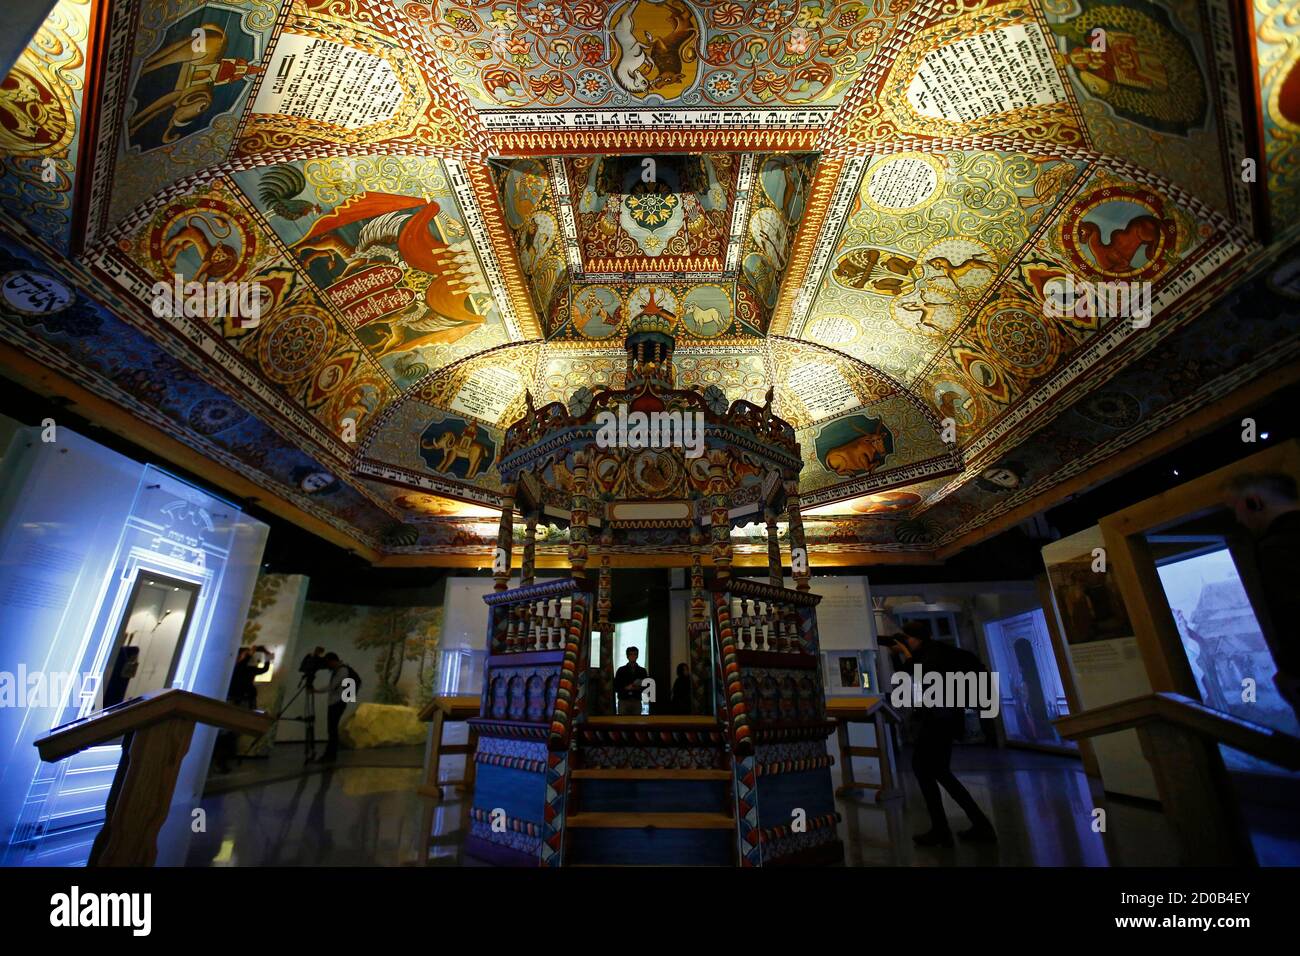 Visitors stand under the 'Celestial Canopy', a reconstructed painted ceiling of a synagogue that once stood in Gwozdziec (present-day Ukraine), at the POLIN Museum of the History of Polish Jews in Warsaw October 21, 2014, one week before the official opening of the core exhibition. Poland, the country on whose soil Nazi Germany carried out the darkest acts of the Holocaust, is starting to re-connect with its other role in Jewish history, as a home for 1,000 years to one of the world's biggest Jewish communities. The country will take a step in that direction next week with the opening of the m Stock Photo